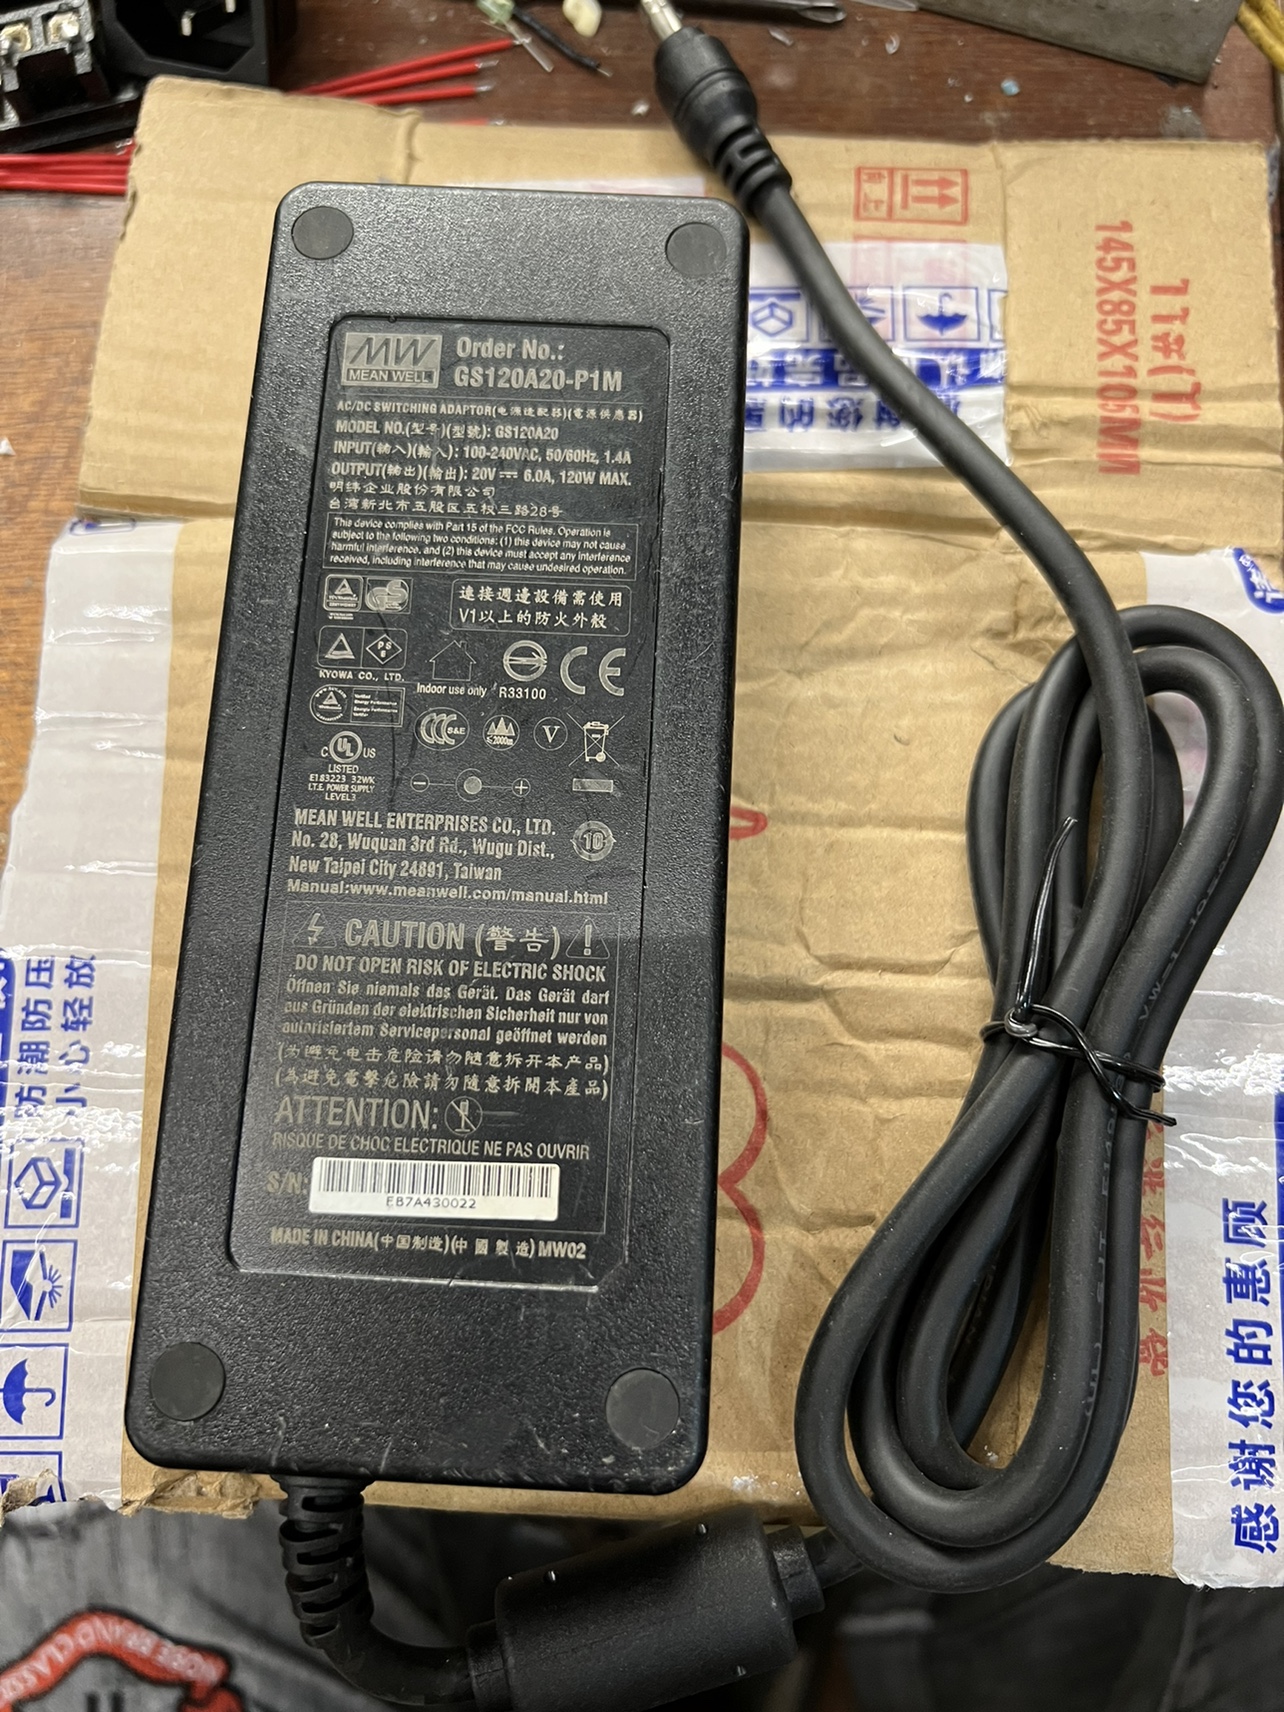 *Brand NEW*GS120A20 MW 20V 6A AC DC ADAPTER POWER SUPPLY